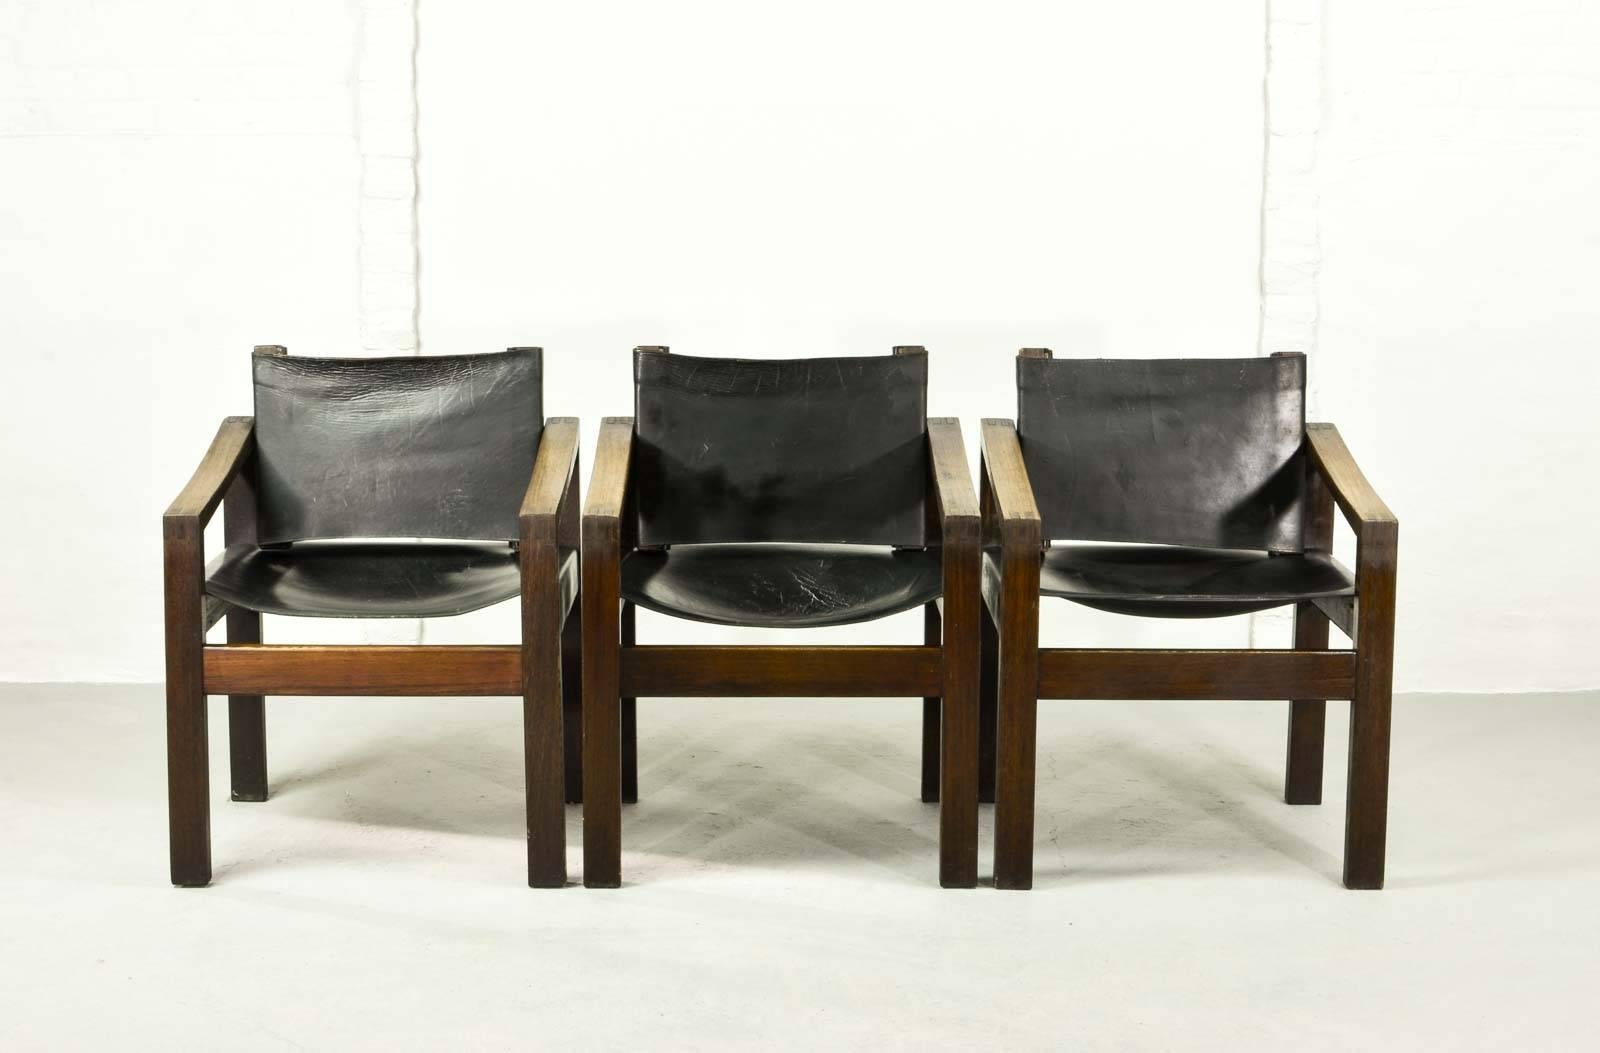 A set of three Spartan designed chairs from unknown origin, but beautiful in its simplicity and craftsmanship. The set features a cubic solid wengé wooden frame with sturdy saddle leather seating and backrest.
 